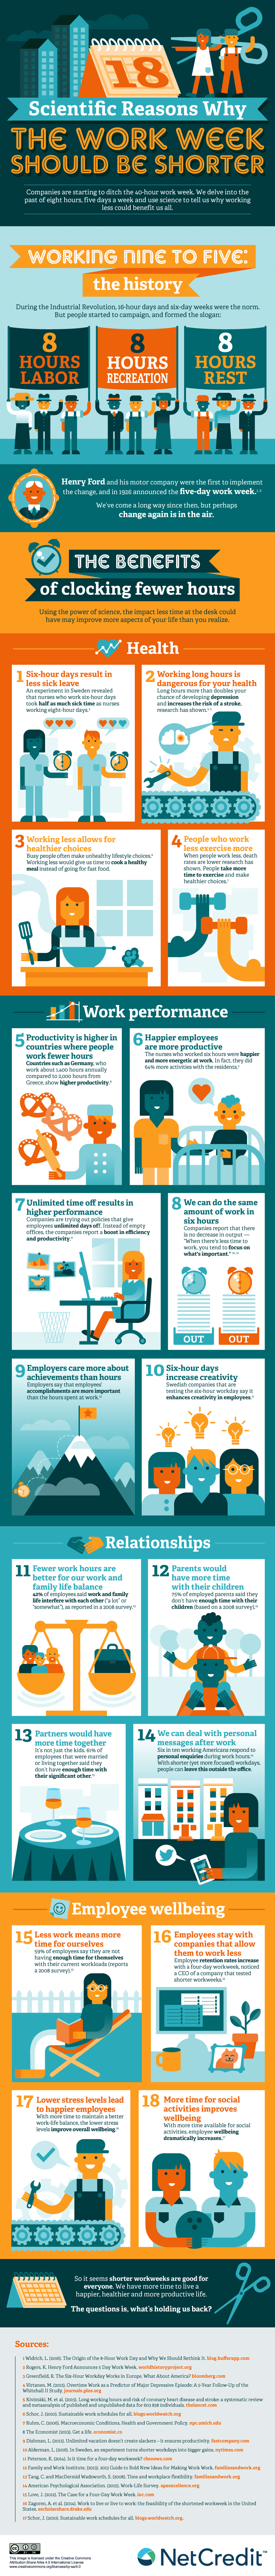 18 Scientific Reasons Why the Work Week Should Be Shorter - #infographic